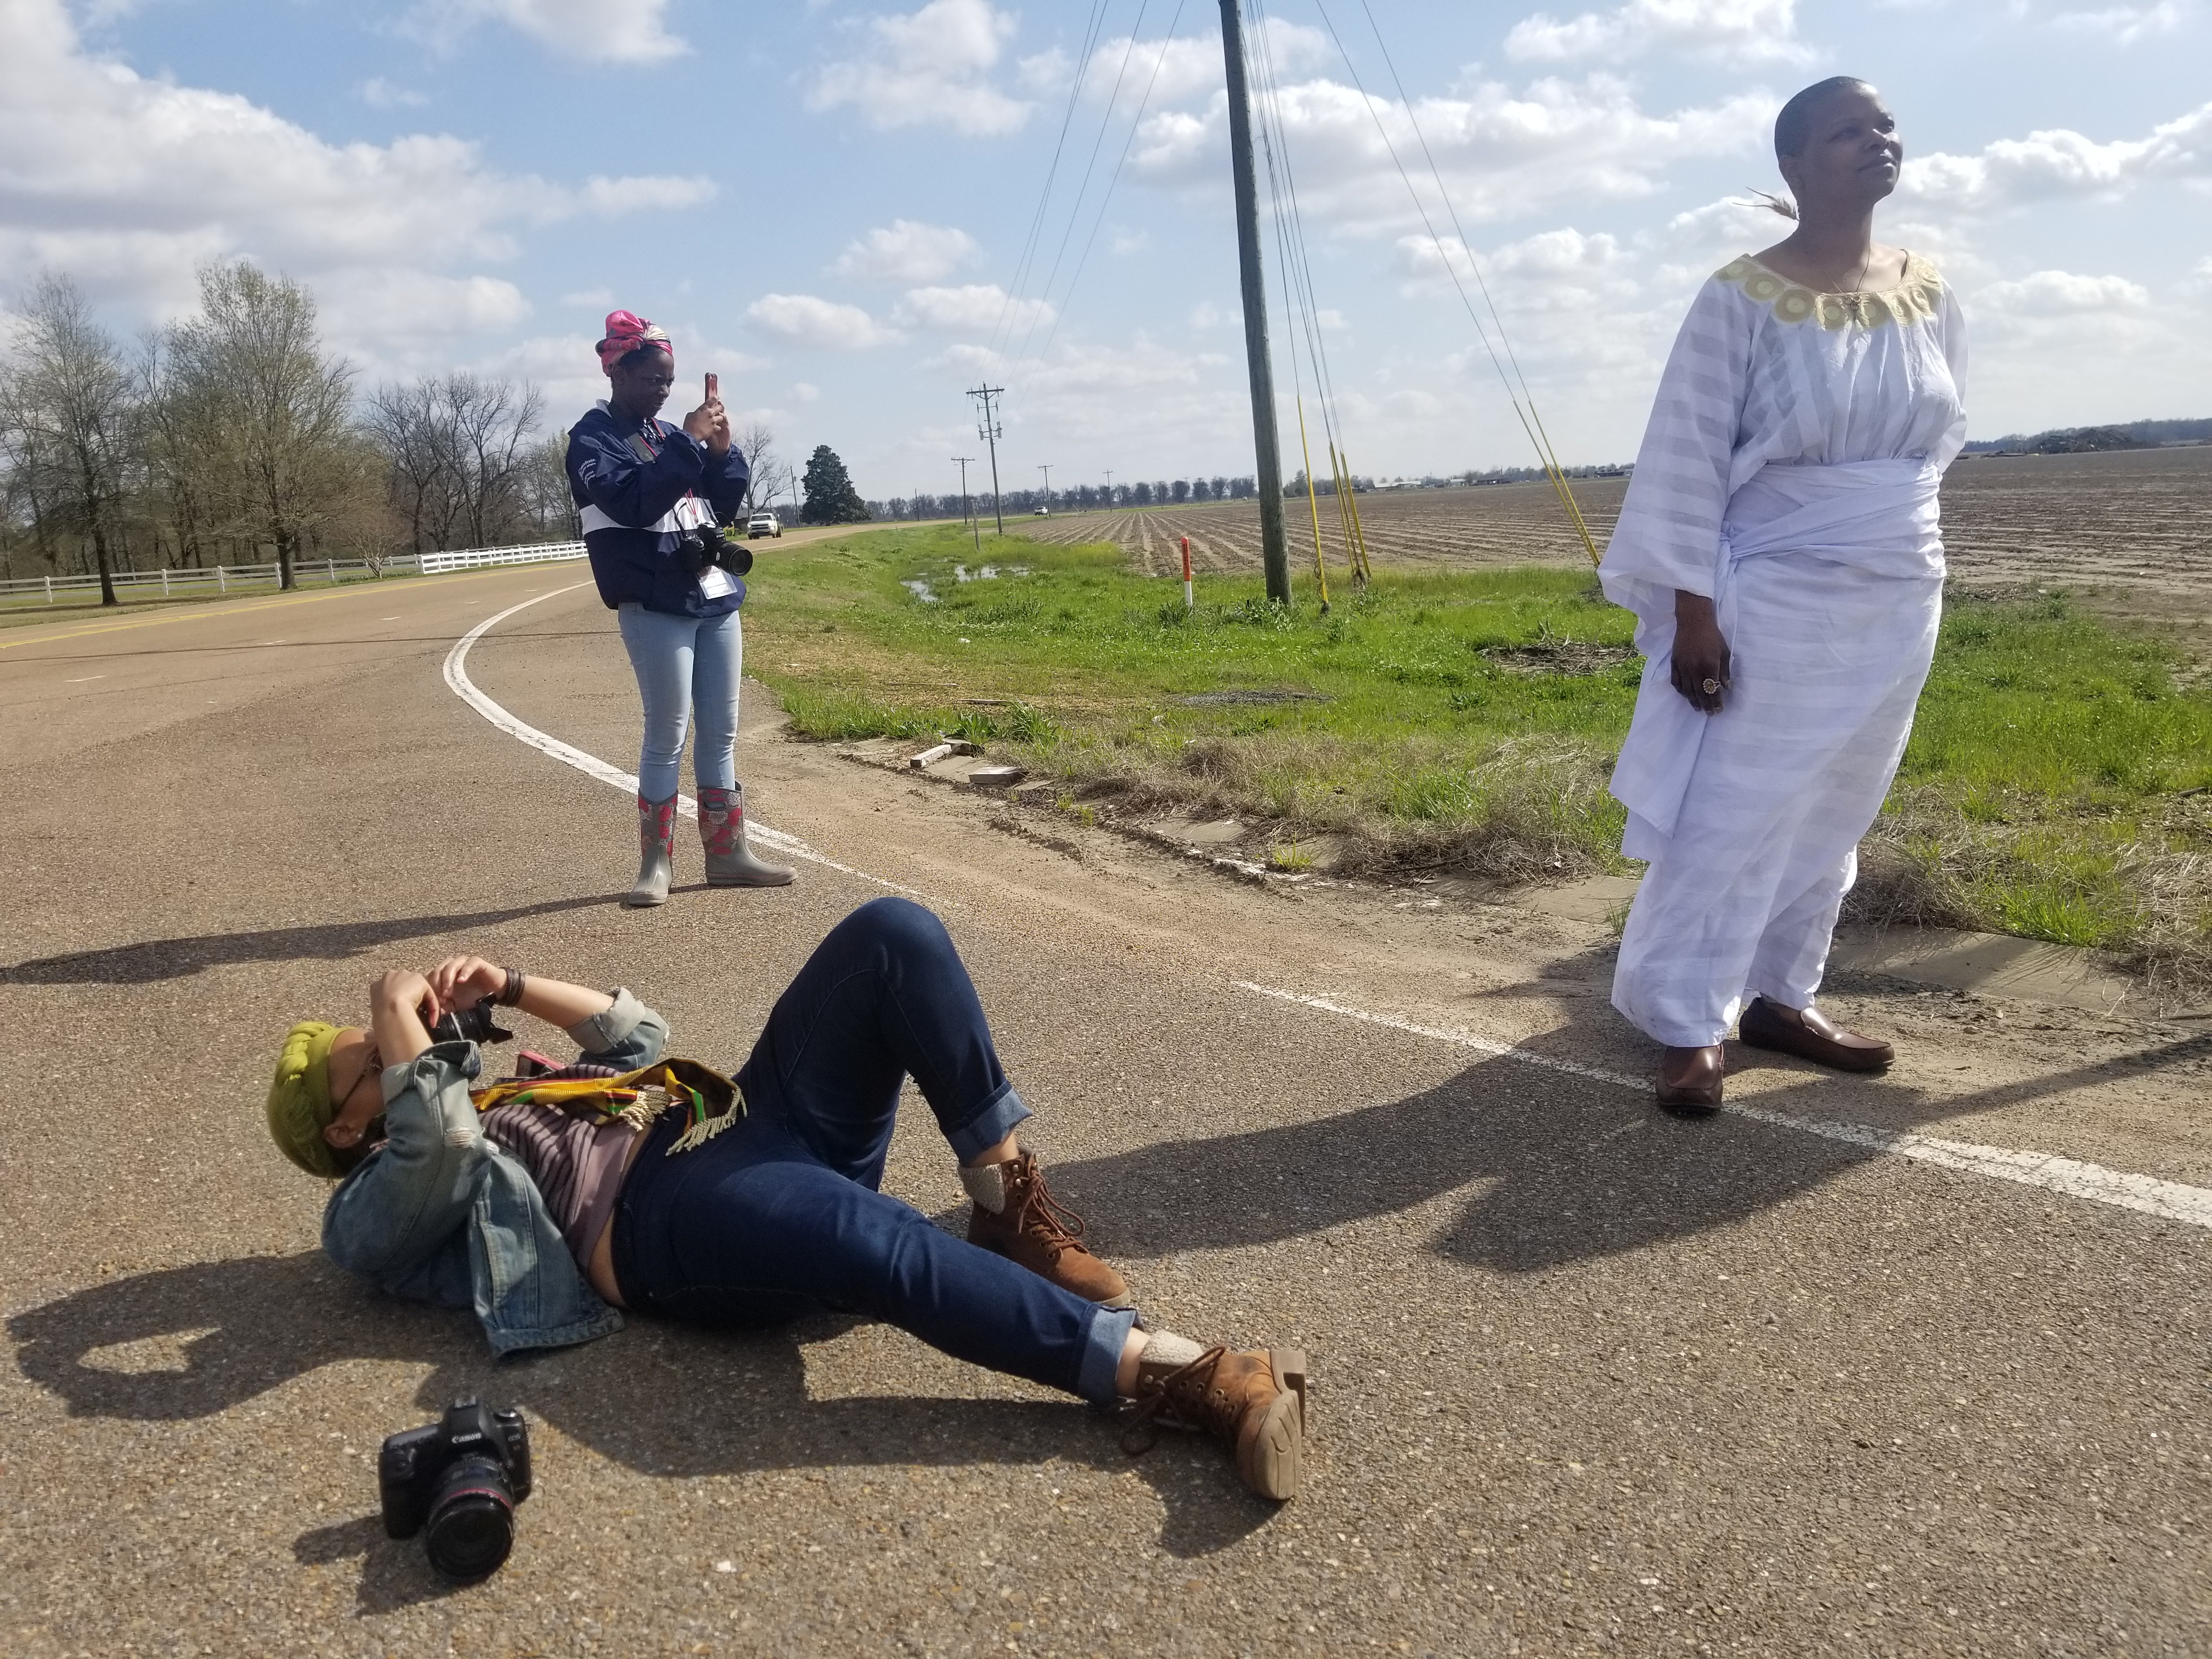 Shumate lays down on the New Africa Road in Clarksdale, MS filming Chandra Williams, Director of the Crossroads Cultural Arts Center